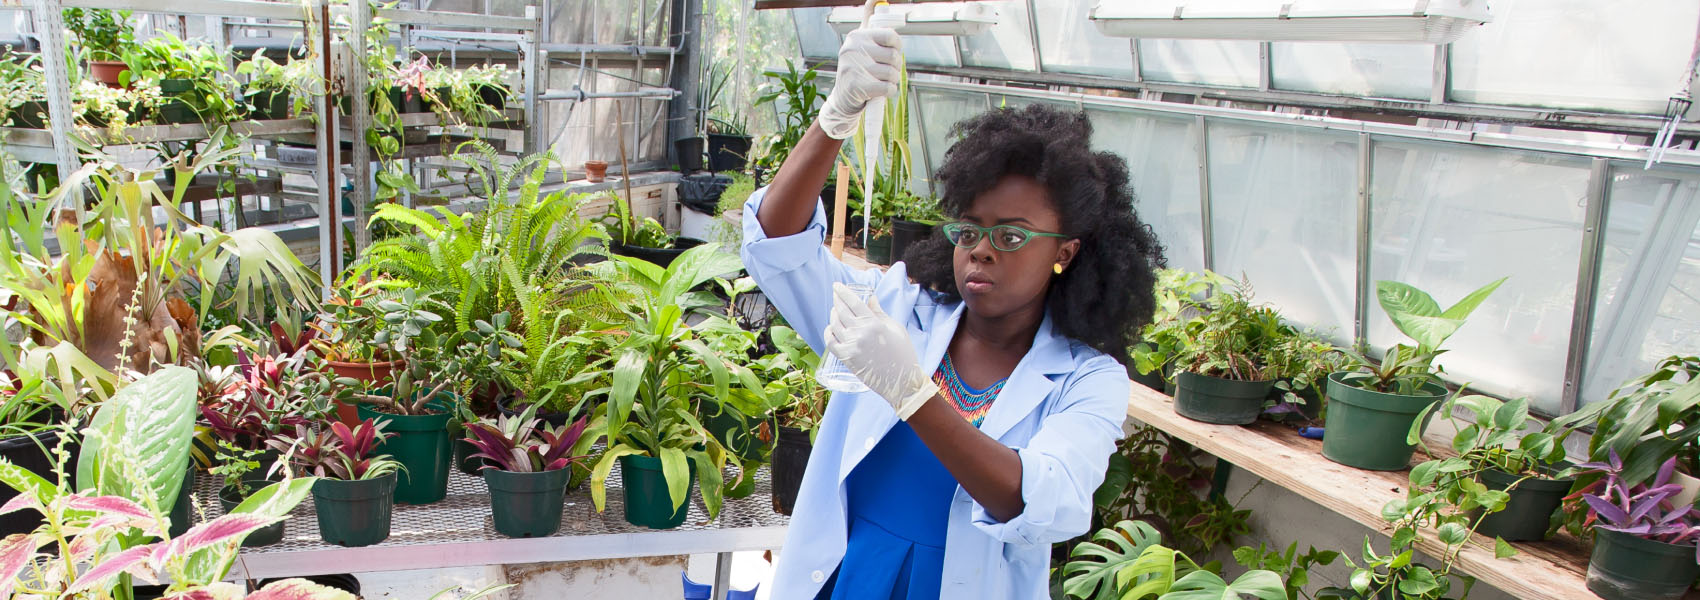 Undergraduate botany student at Chicago State University conducting soil sample tests in CSU’s greenhouse.